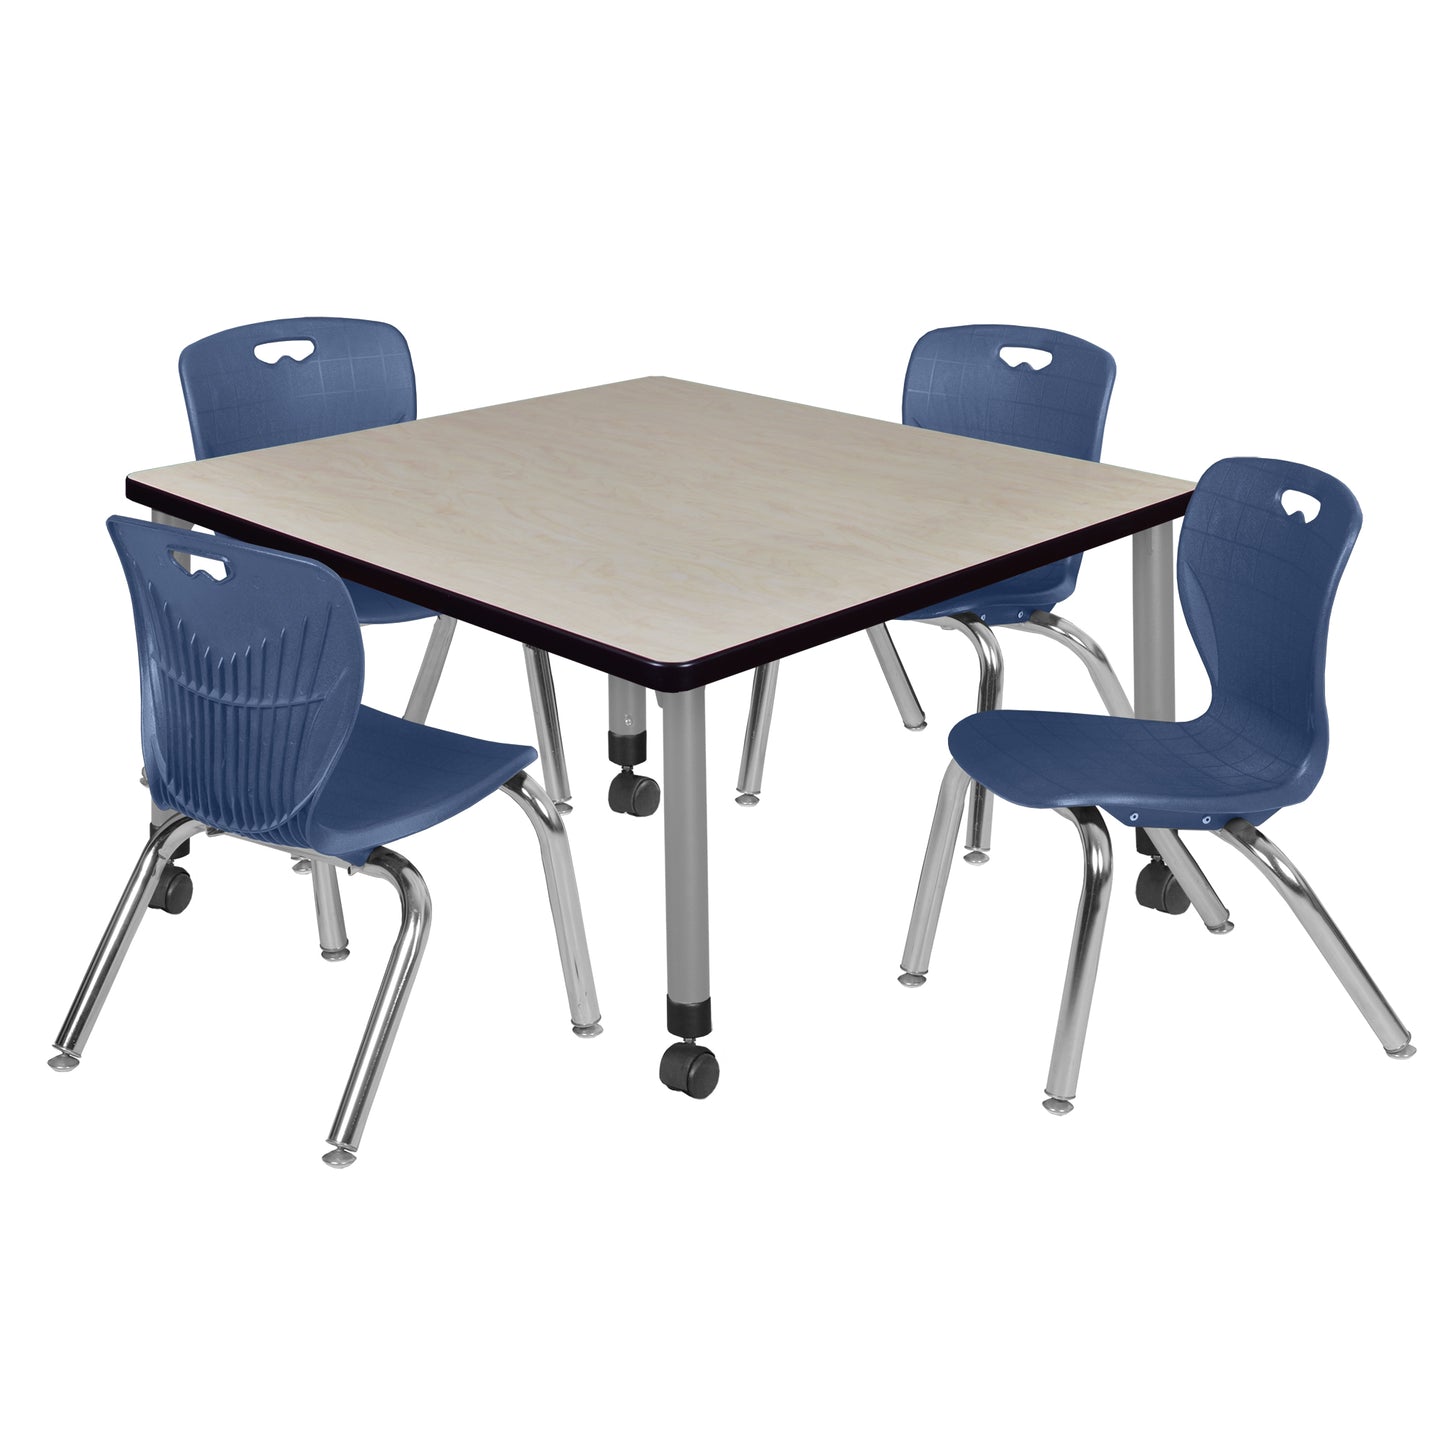 Regency Kee 42 in. Square Adjustable Classroom Table & 4 Andy 12 in. Stack Chairs